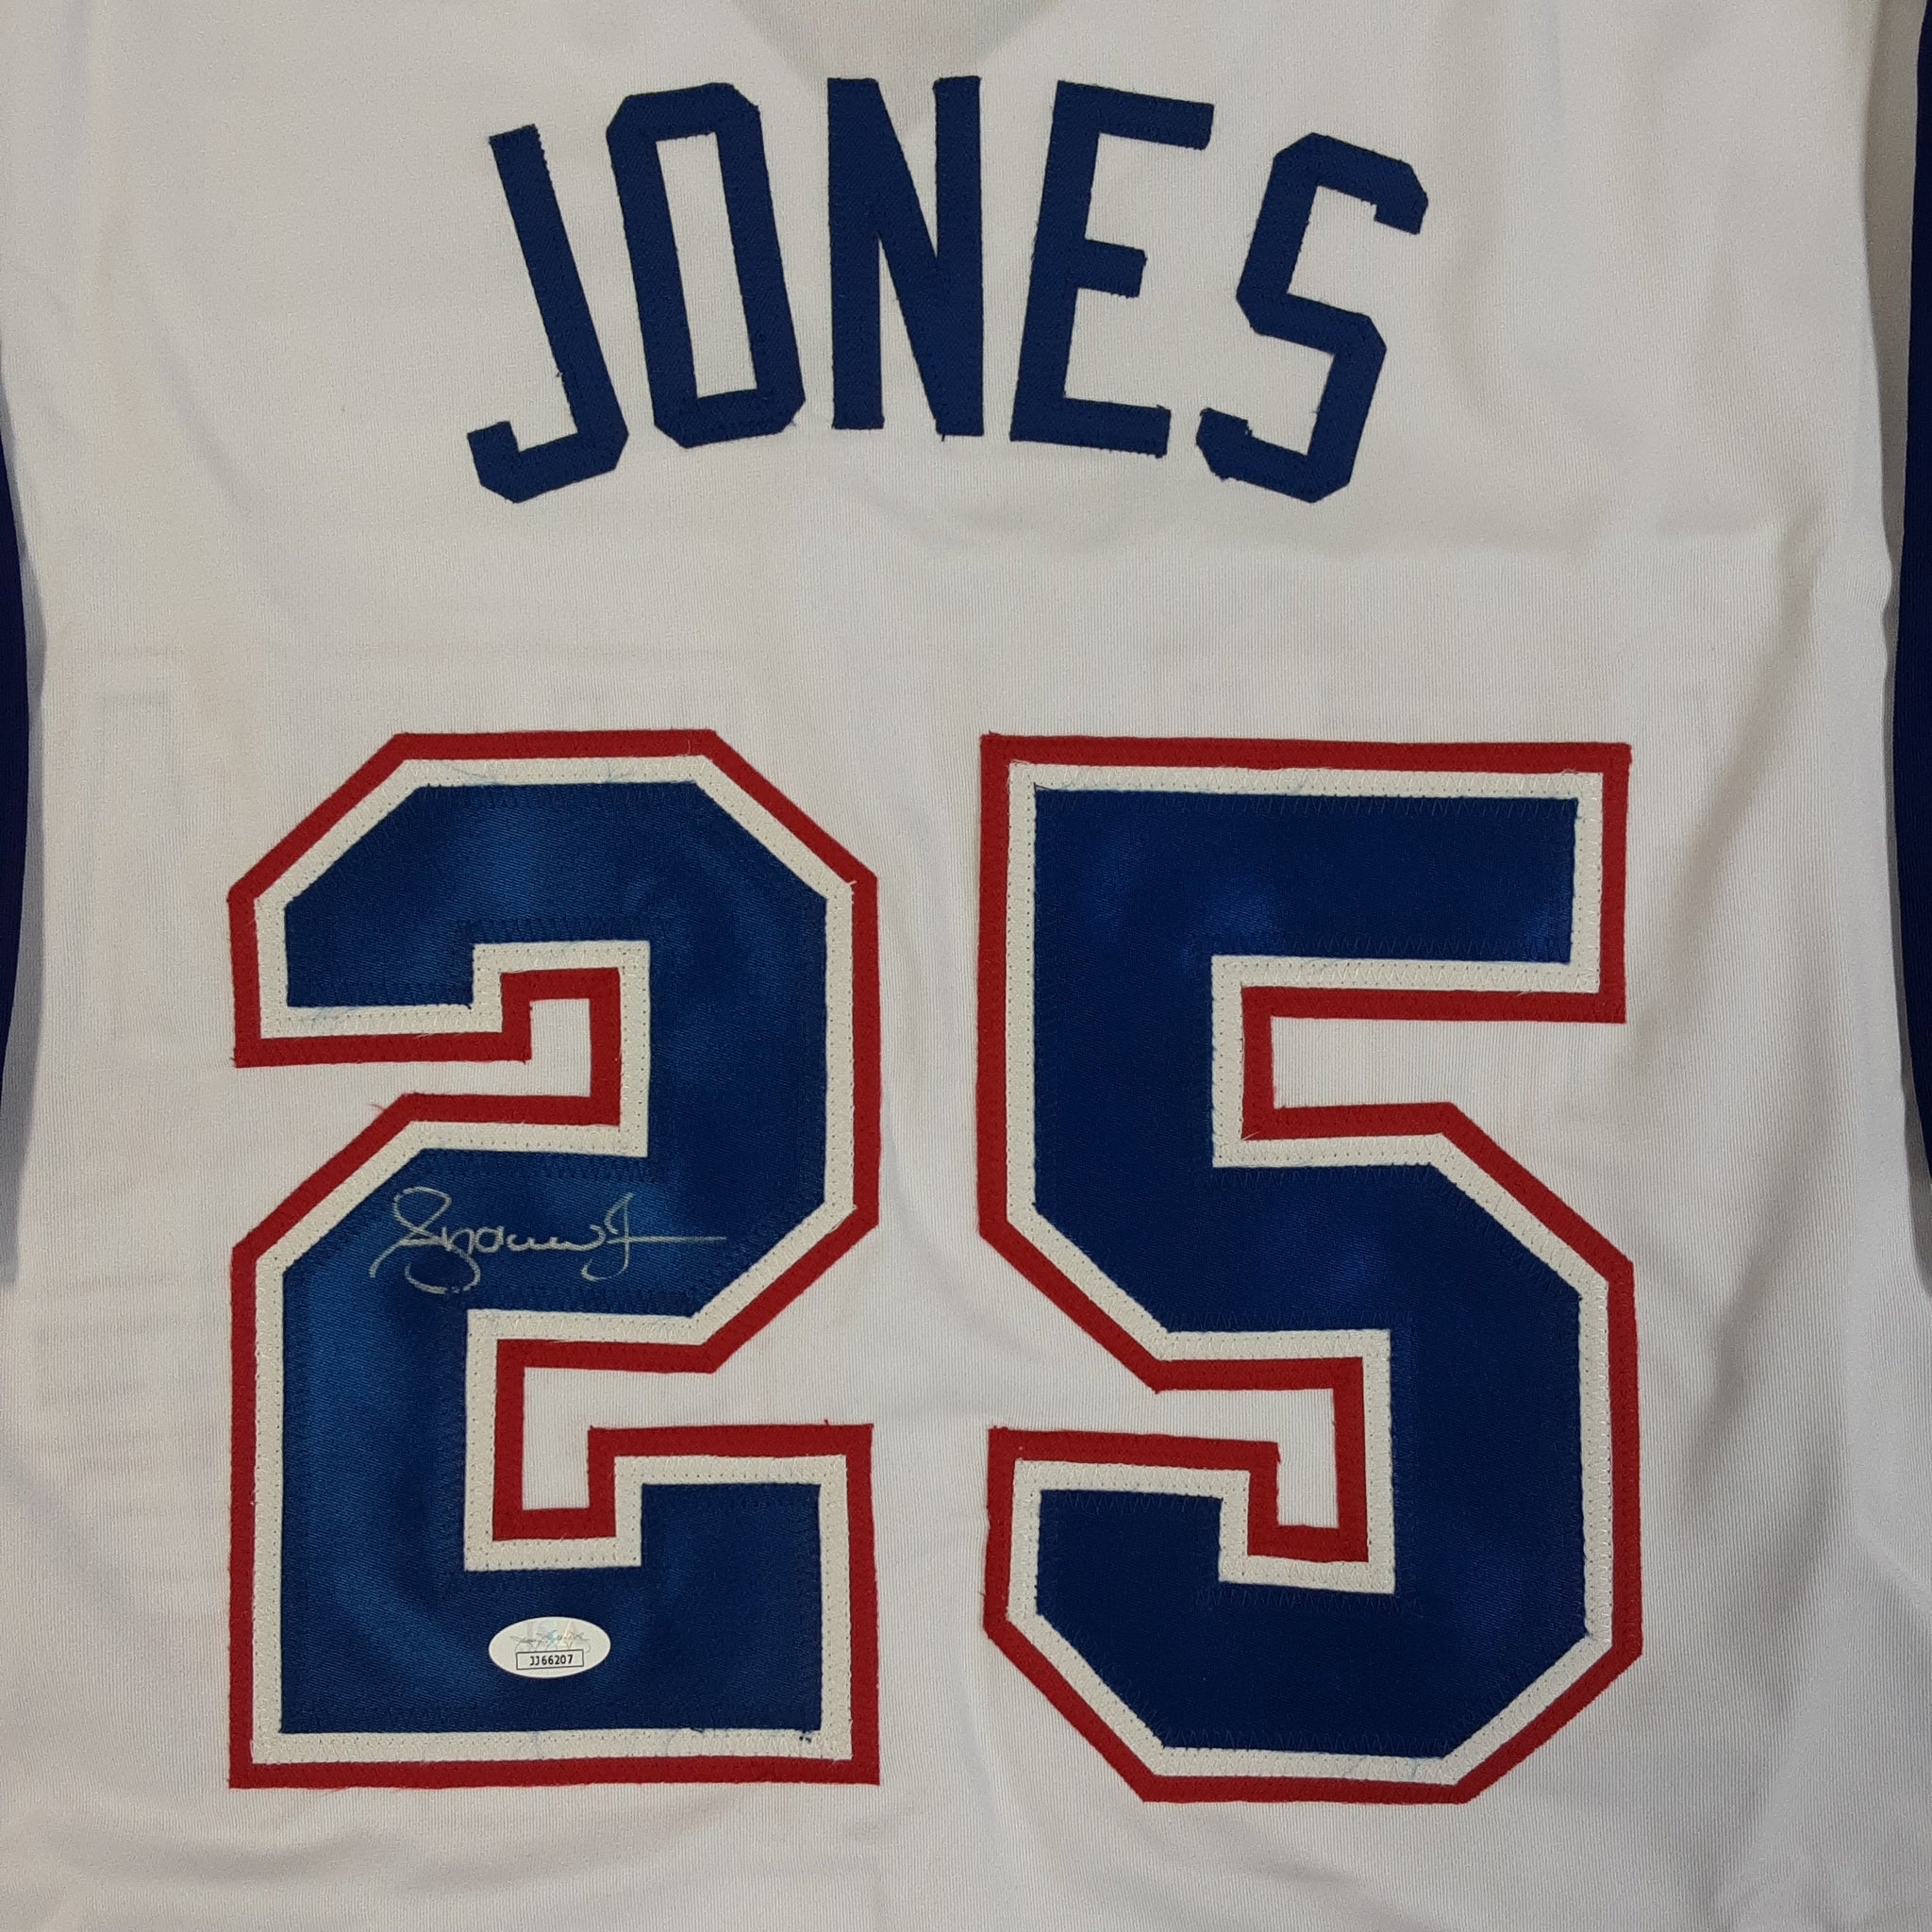 Andruw Jones Authentic Signed Pro Style Jersey Autographed JSA-